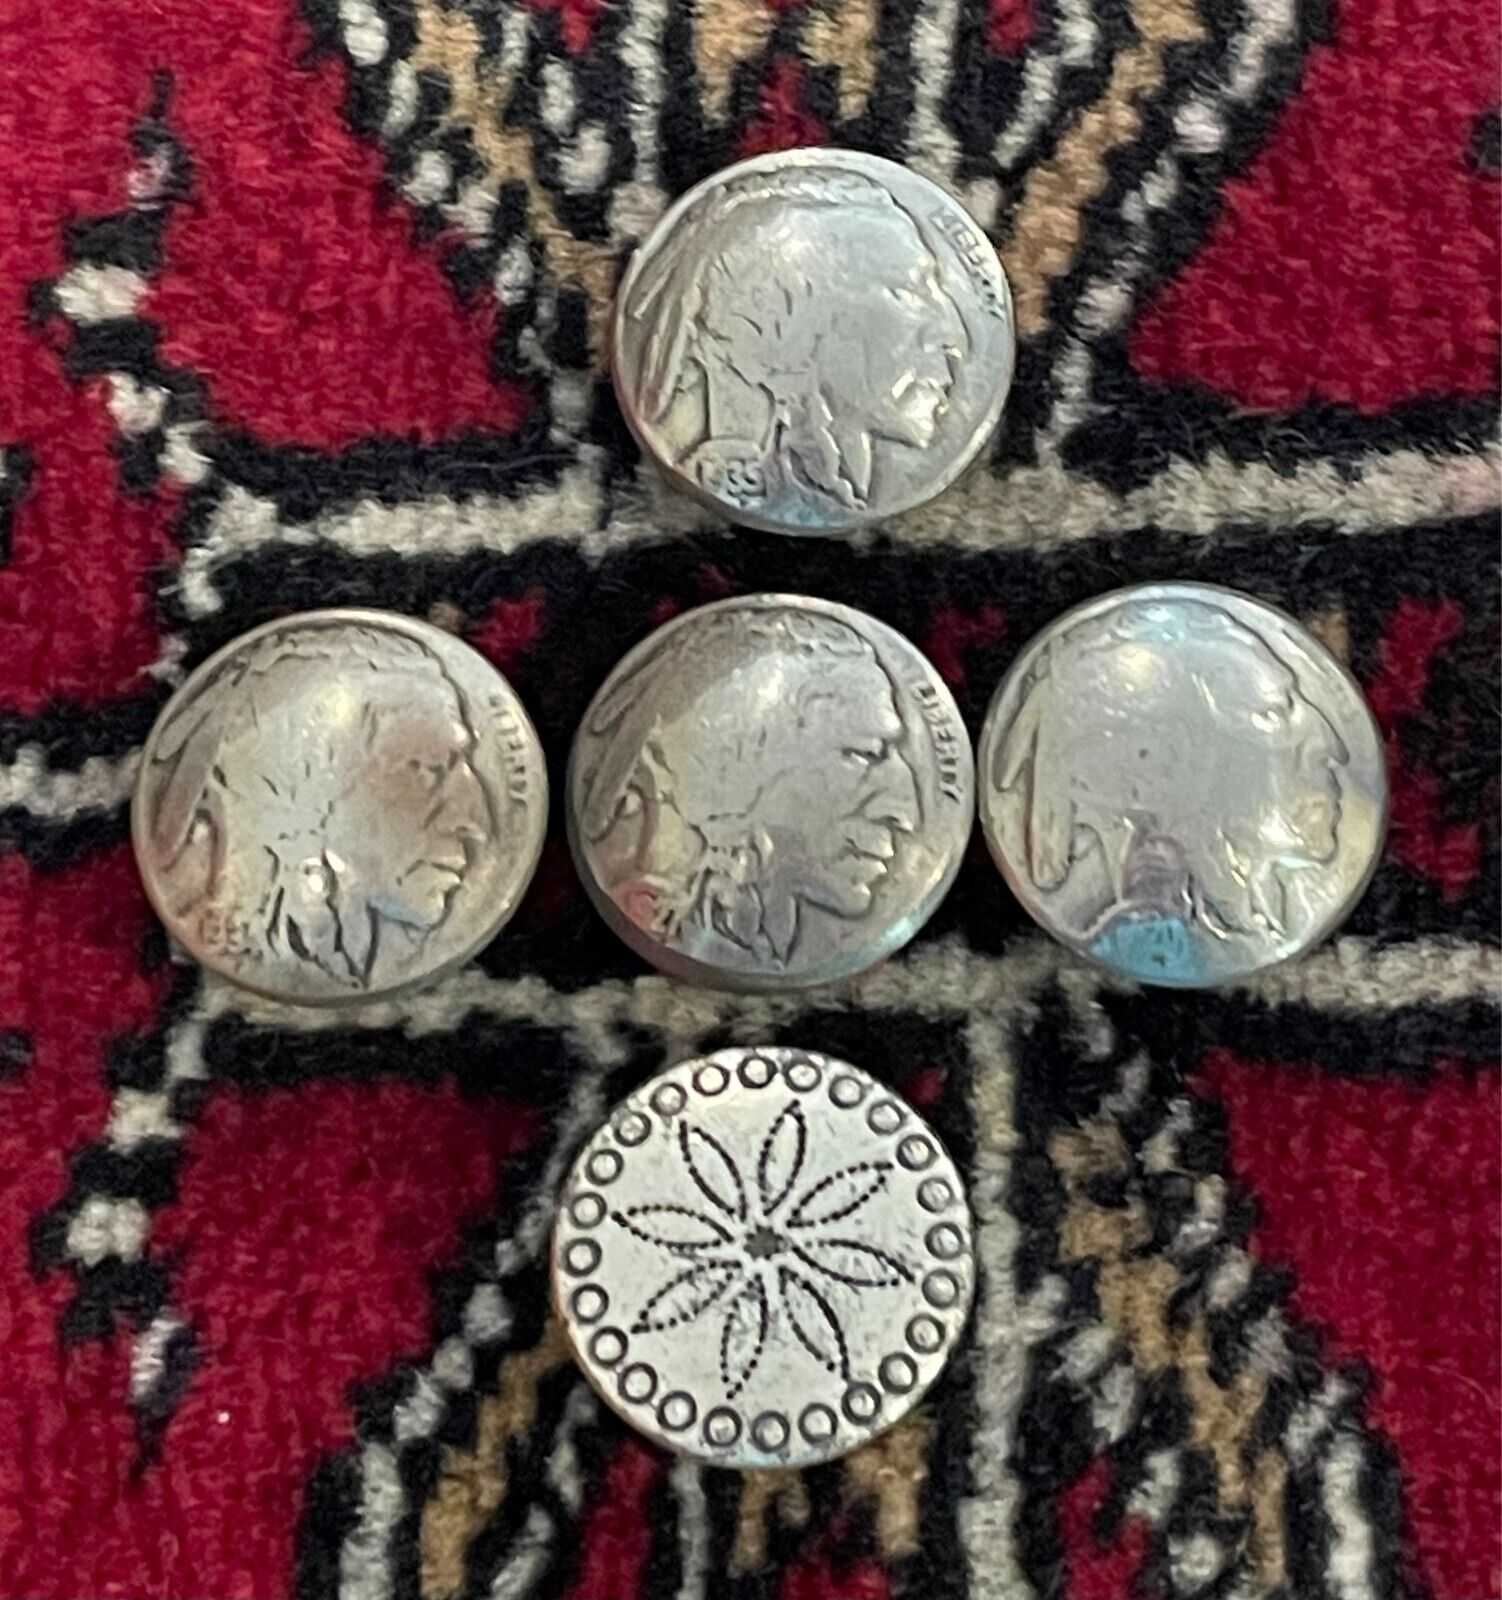 4 REAL INDIAN HEAD NICKEL BUTTON COVERS PLUS ANOTHER NATIVE AMERICAN TYPE